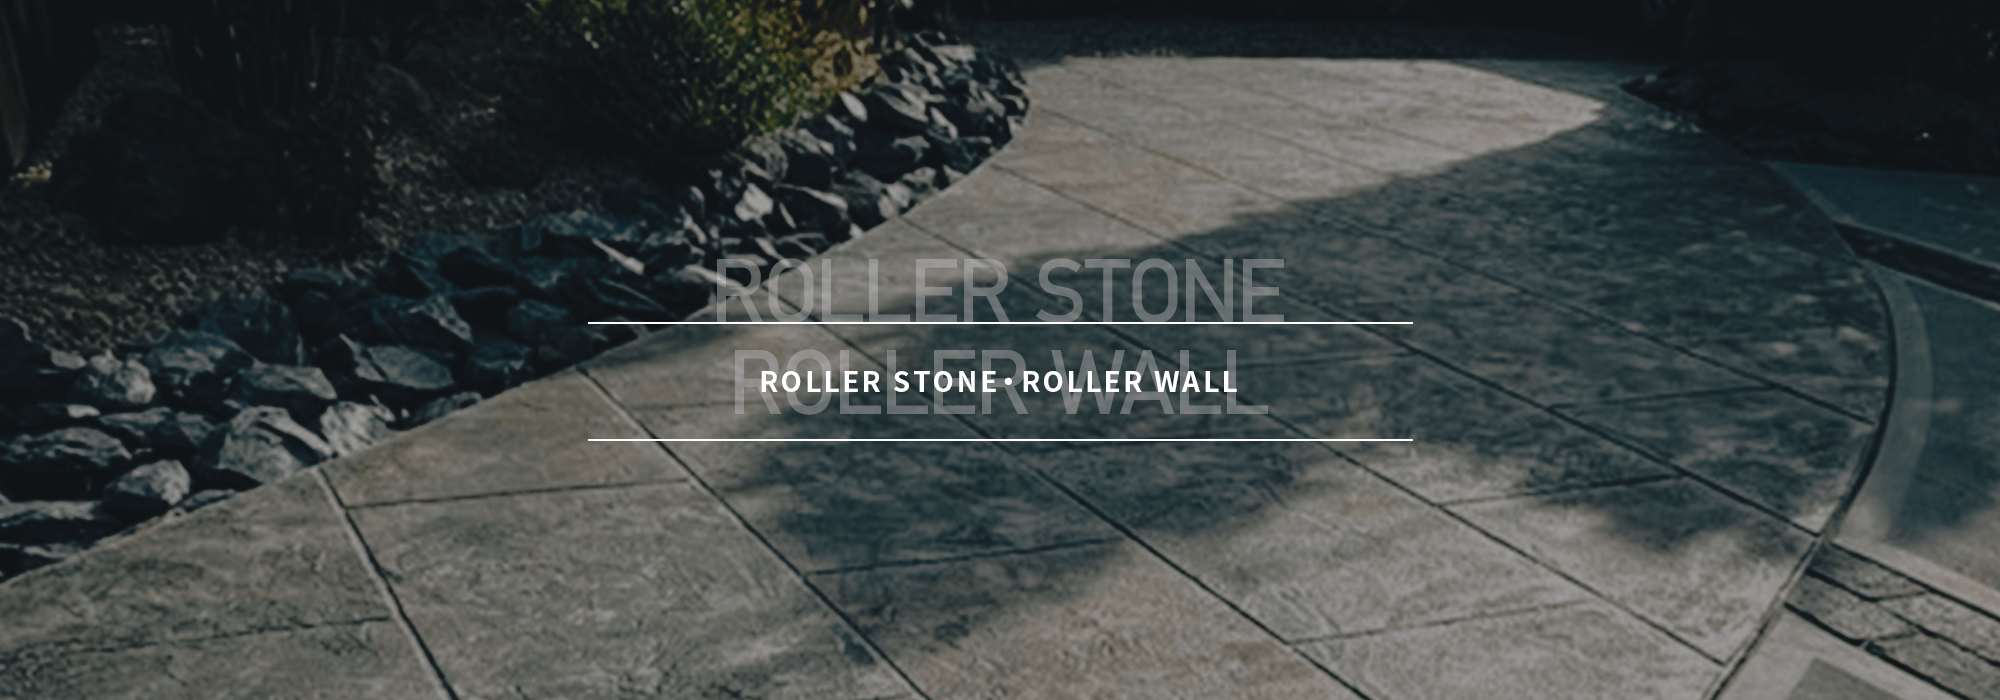 ROLLER STONE・ROLLER WALL